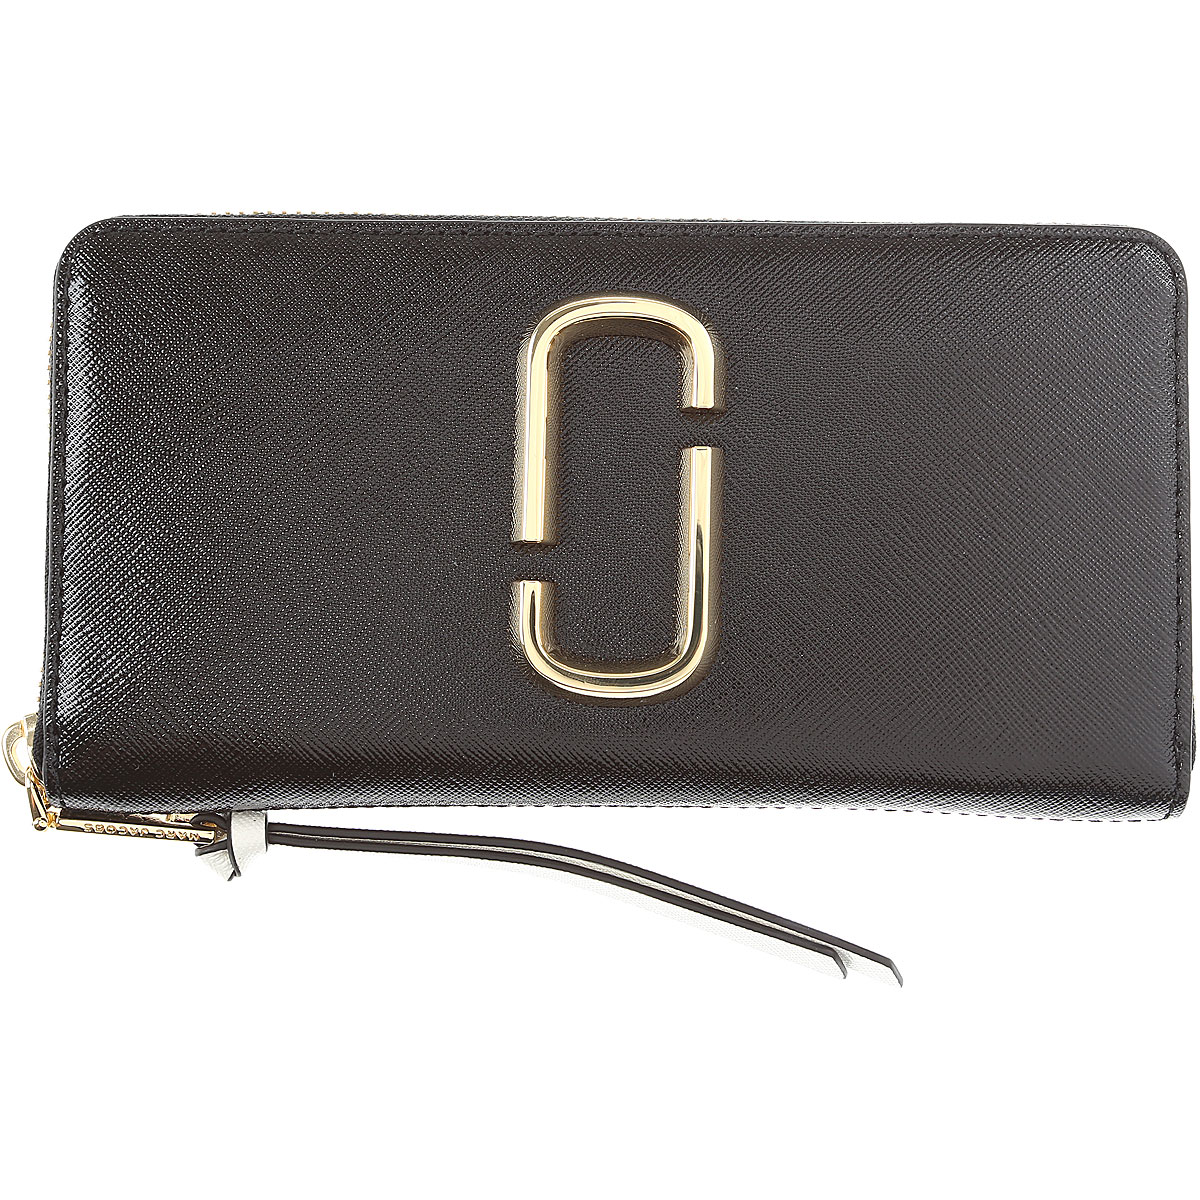 Marc Jacobs Wallets For Women | IUCN Water